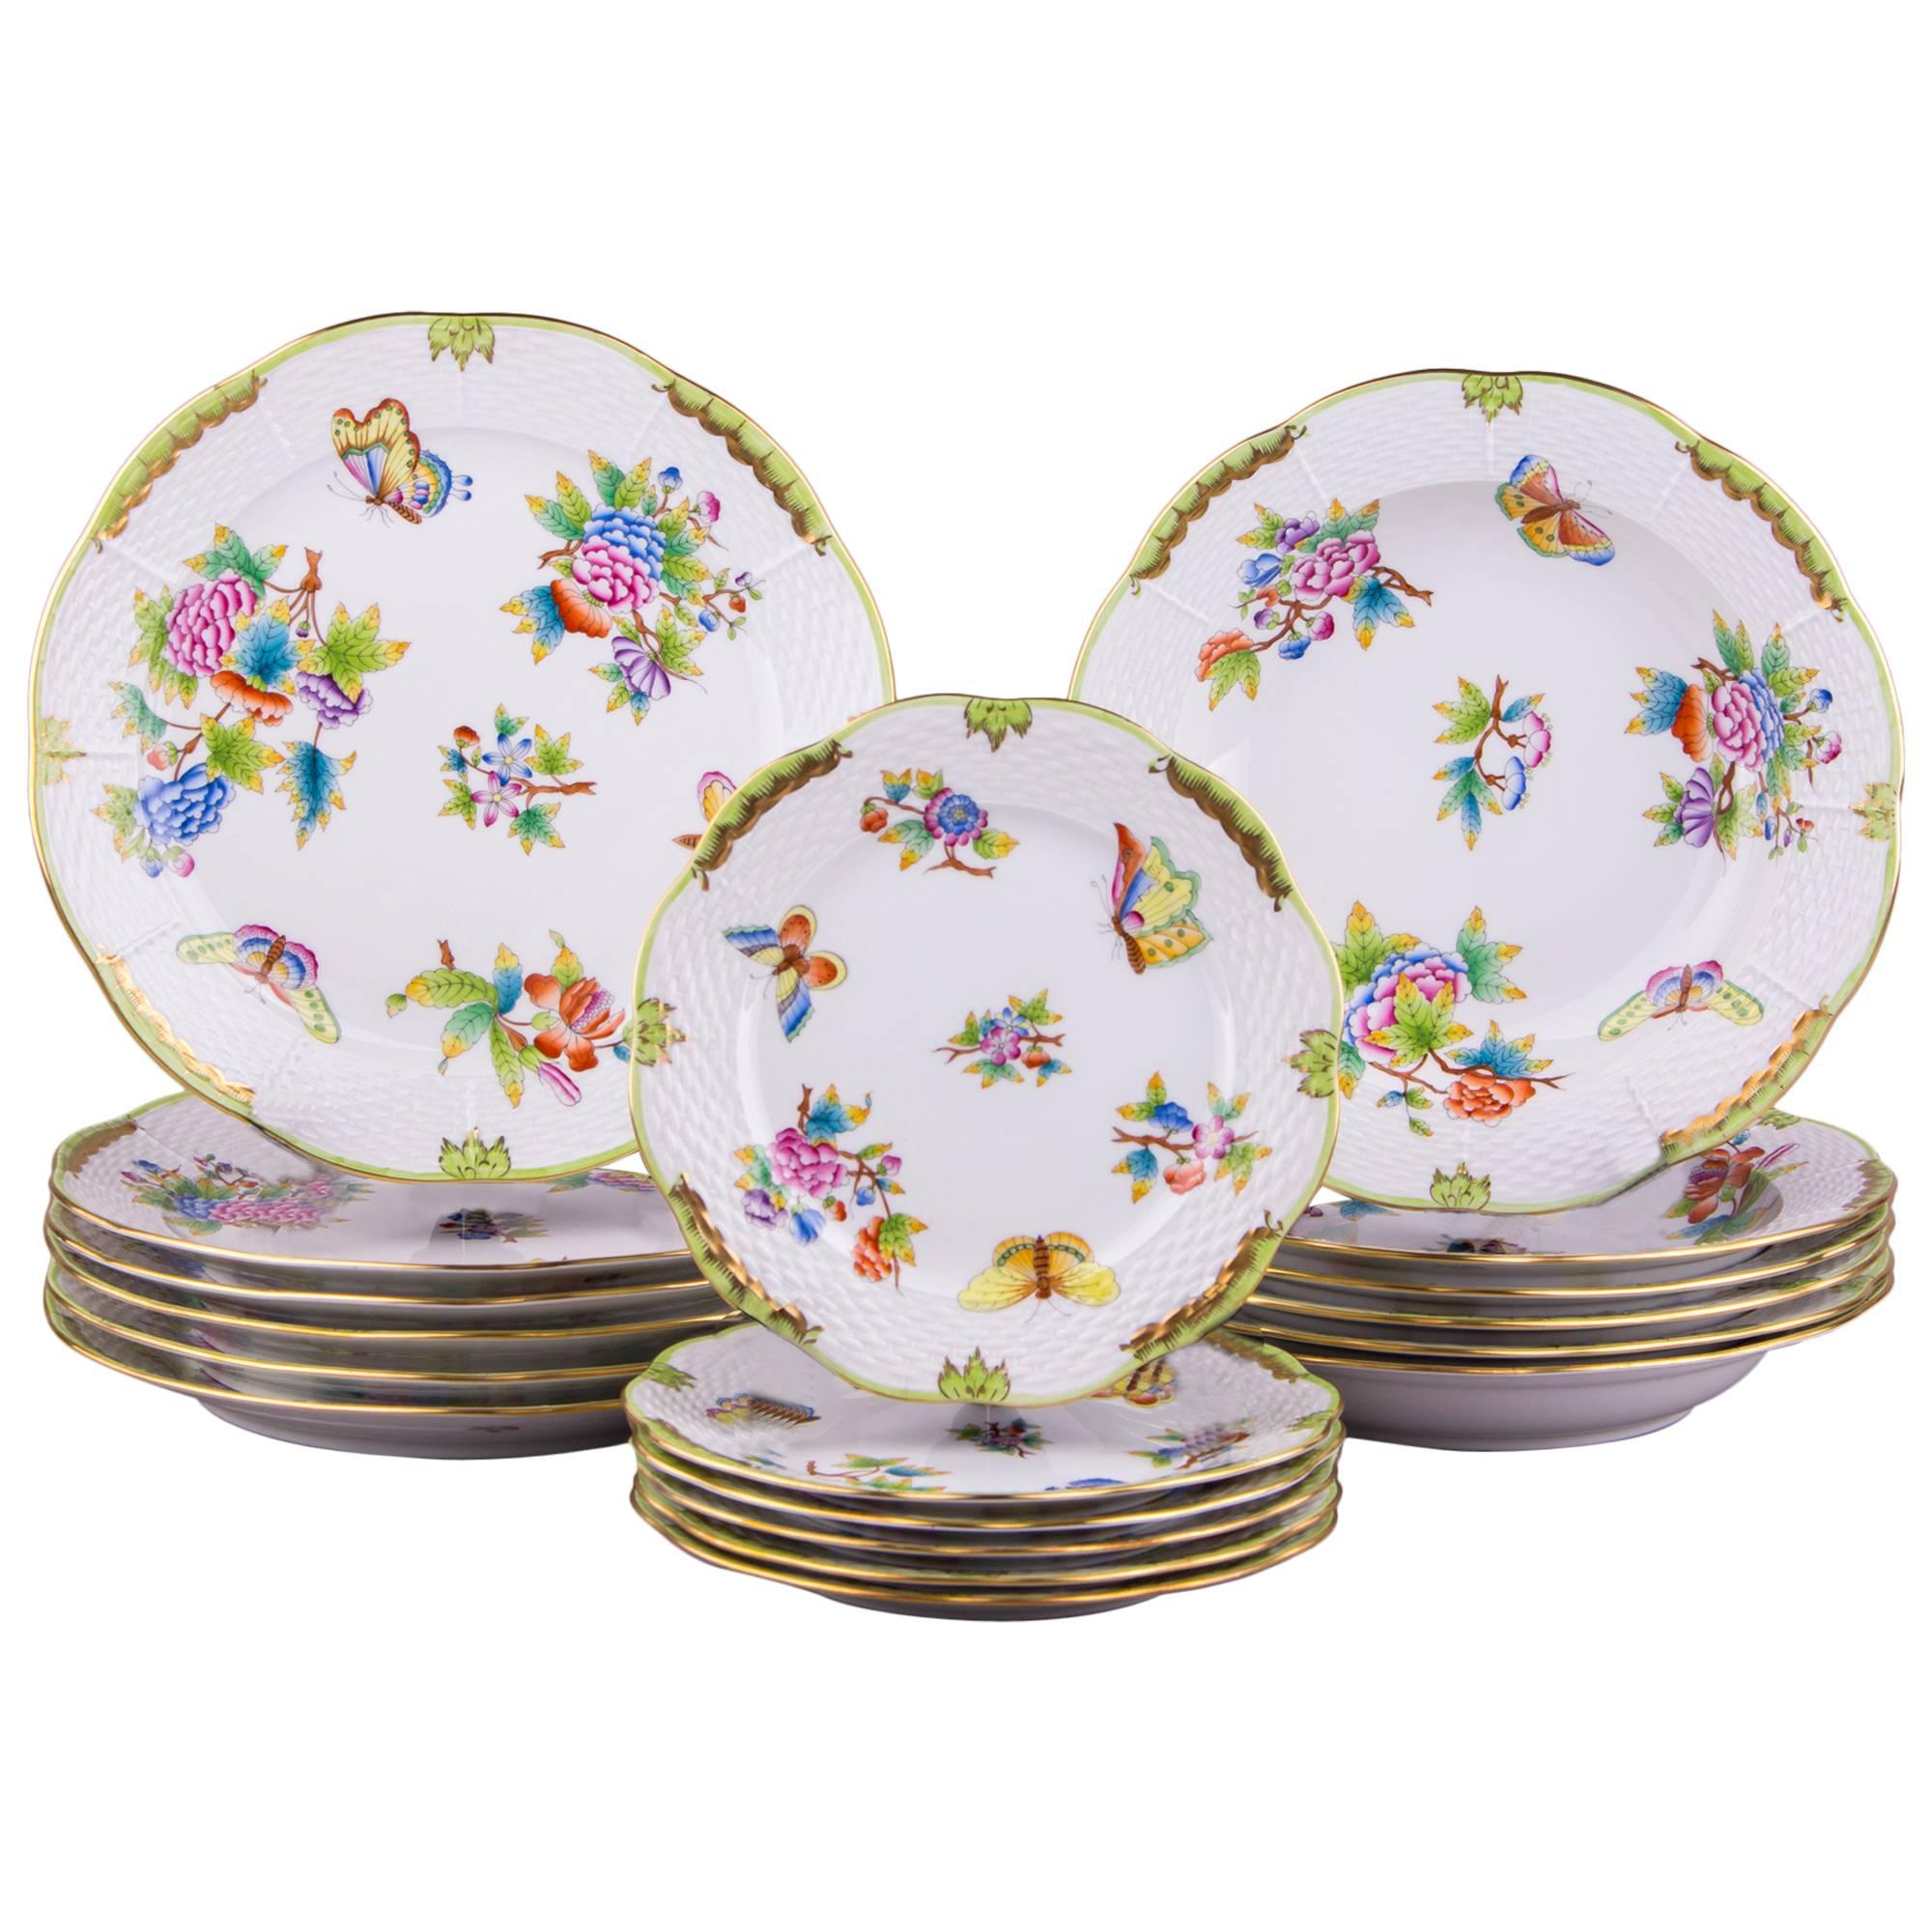 Herend Queen Victoria Plate Set for Six Persons, 18 Pieces For Sale